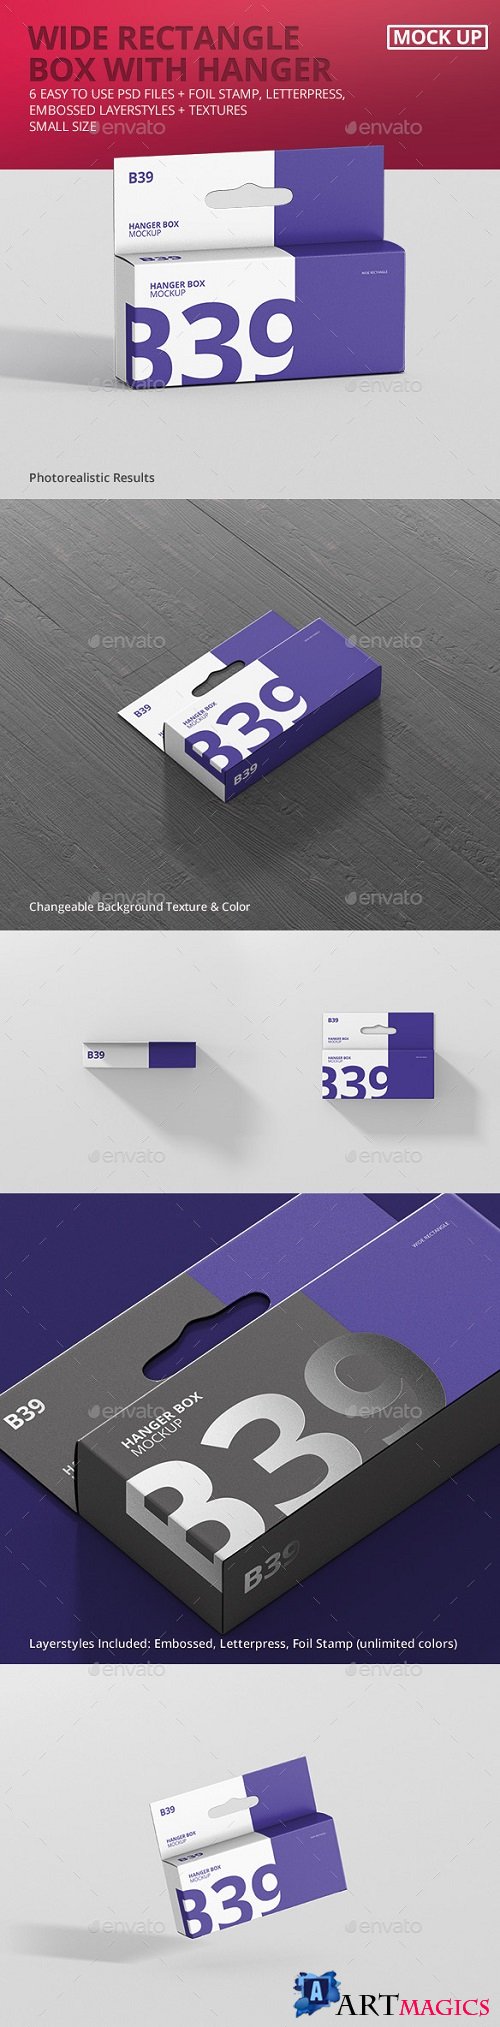 Box Mockup - Wide Small Rectangle with Hanger 21332930